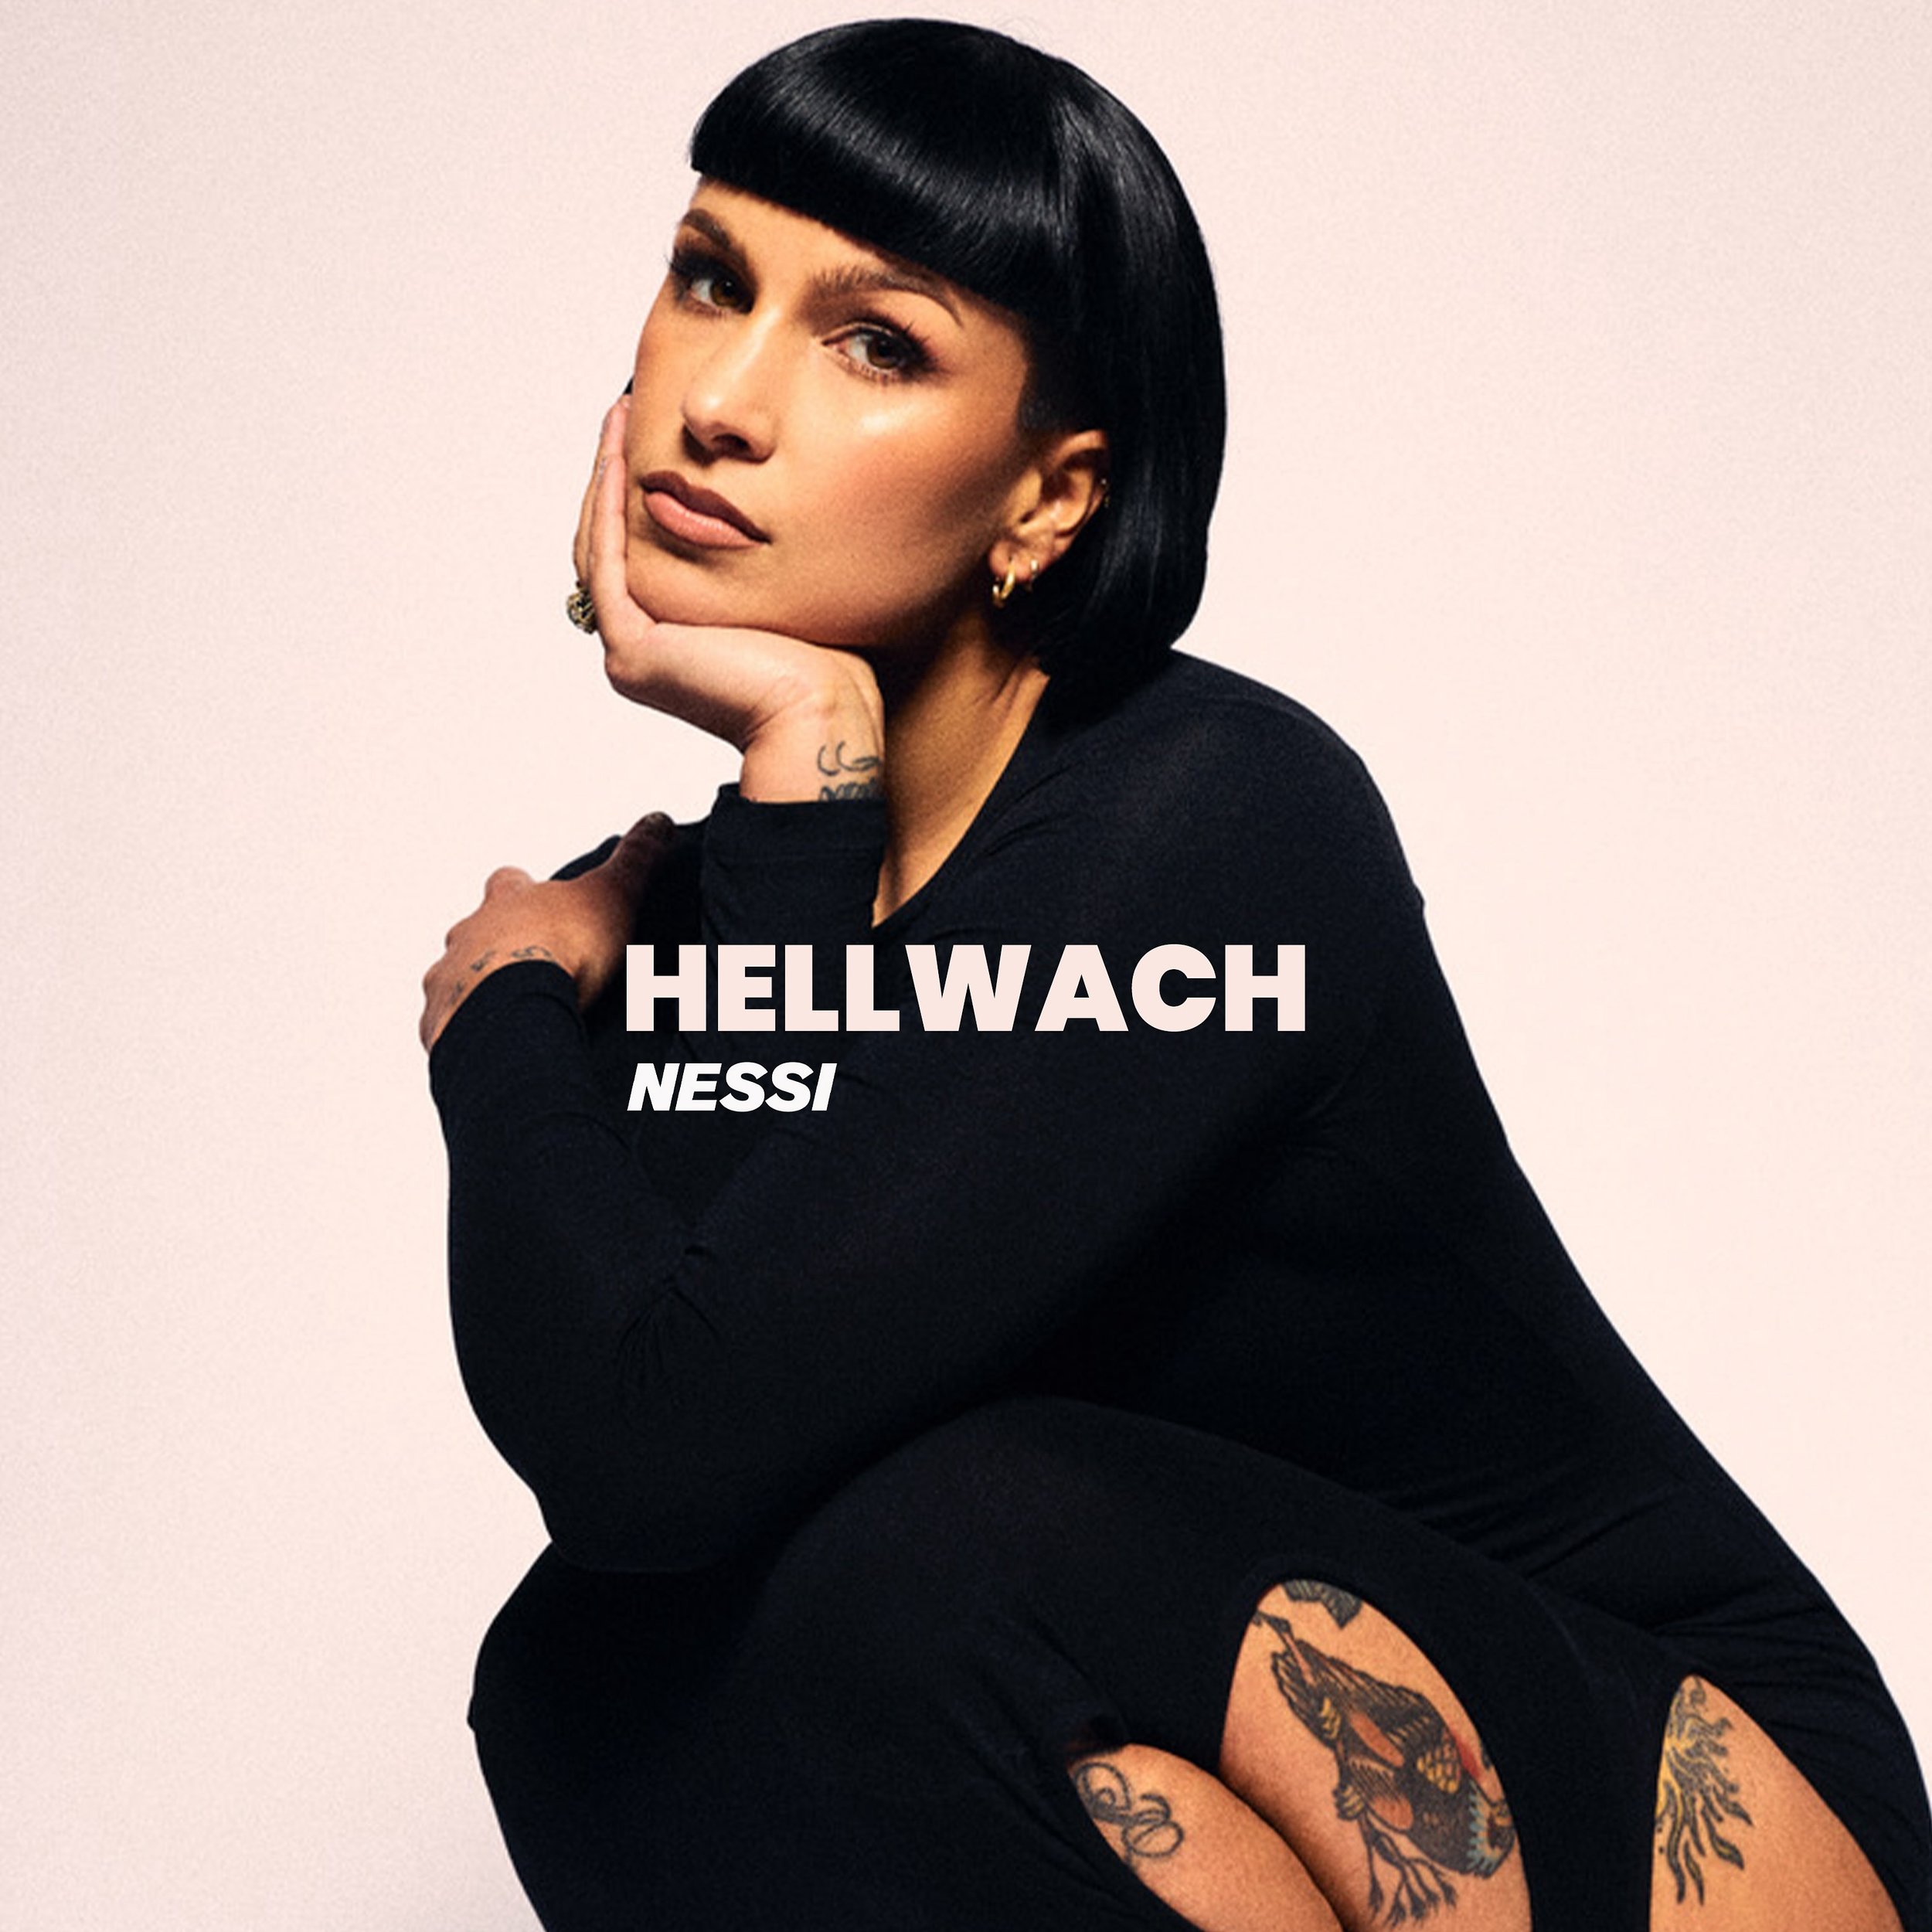 @iamxnessi &lsquo;HELLWACH&rsquo; out now!
Prod. by @philippevers &amp; @hallermusik